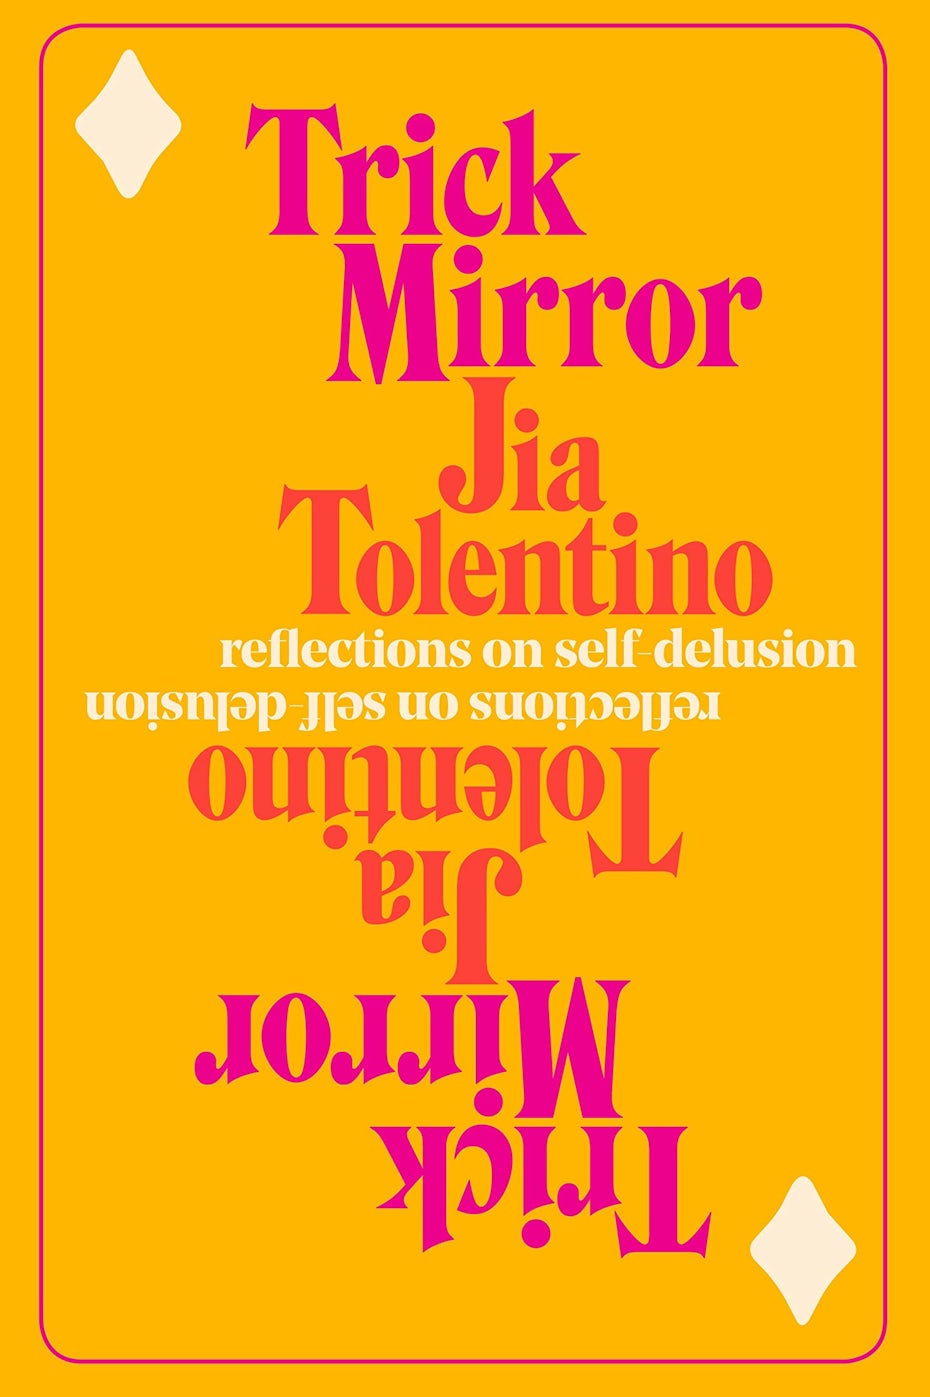 Book cover trends 2020 example with mirrored, pink type